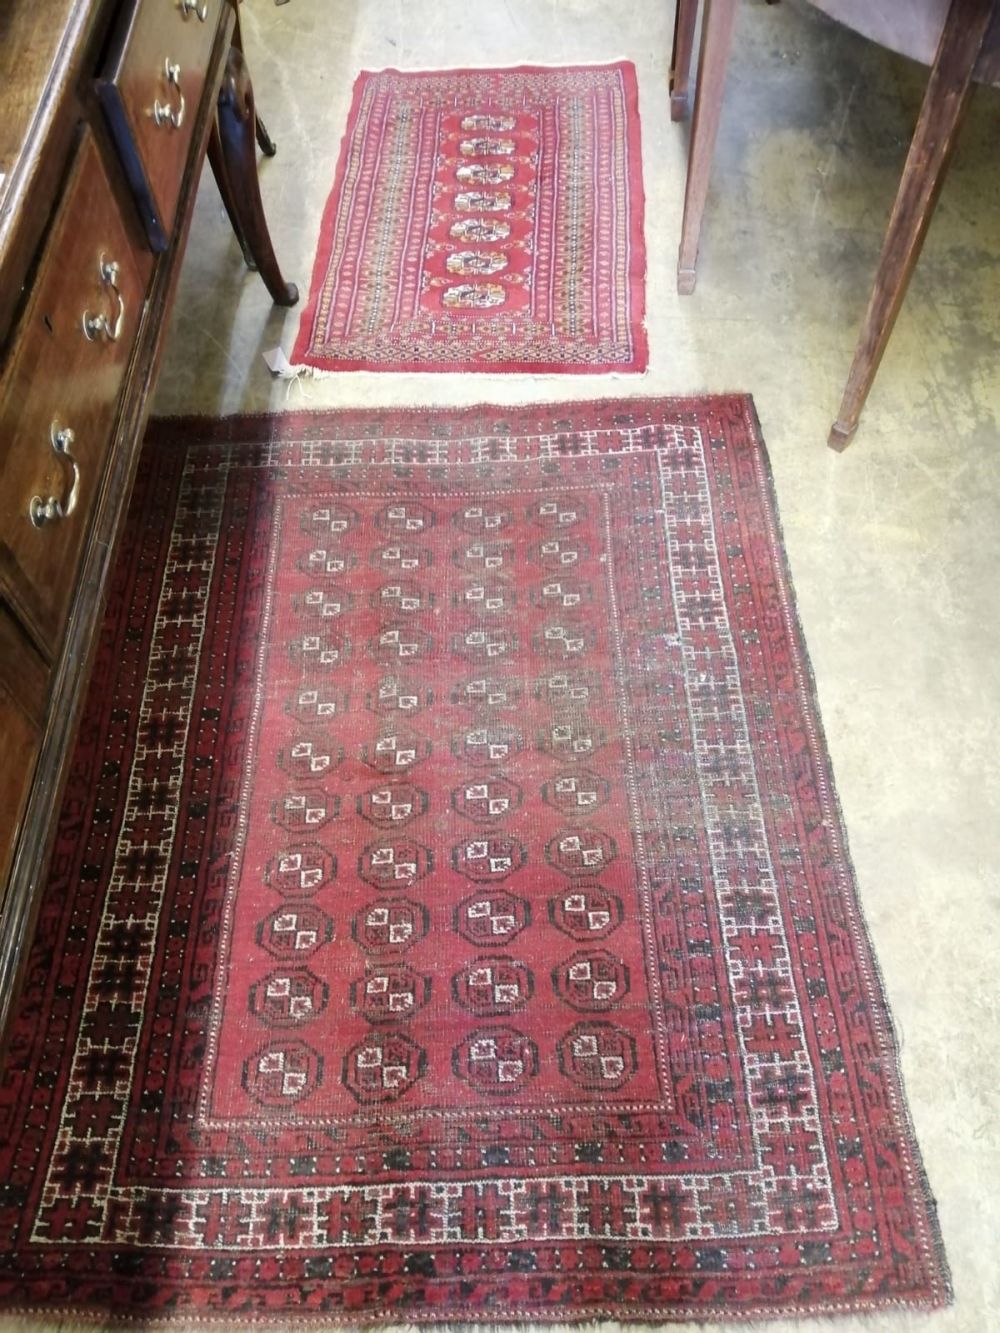 Two Afghan red ground rugs, largest 140 x 110cm